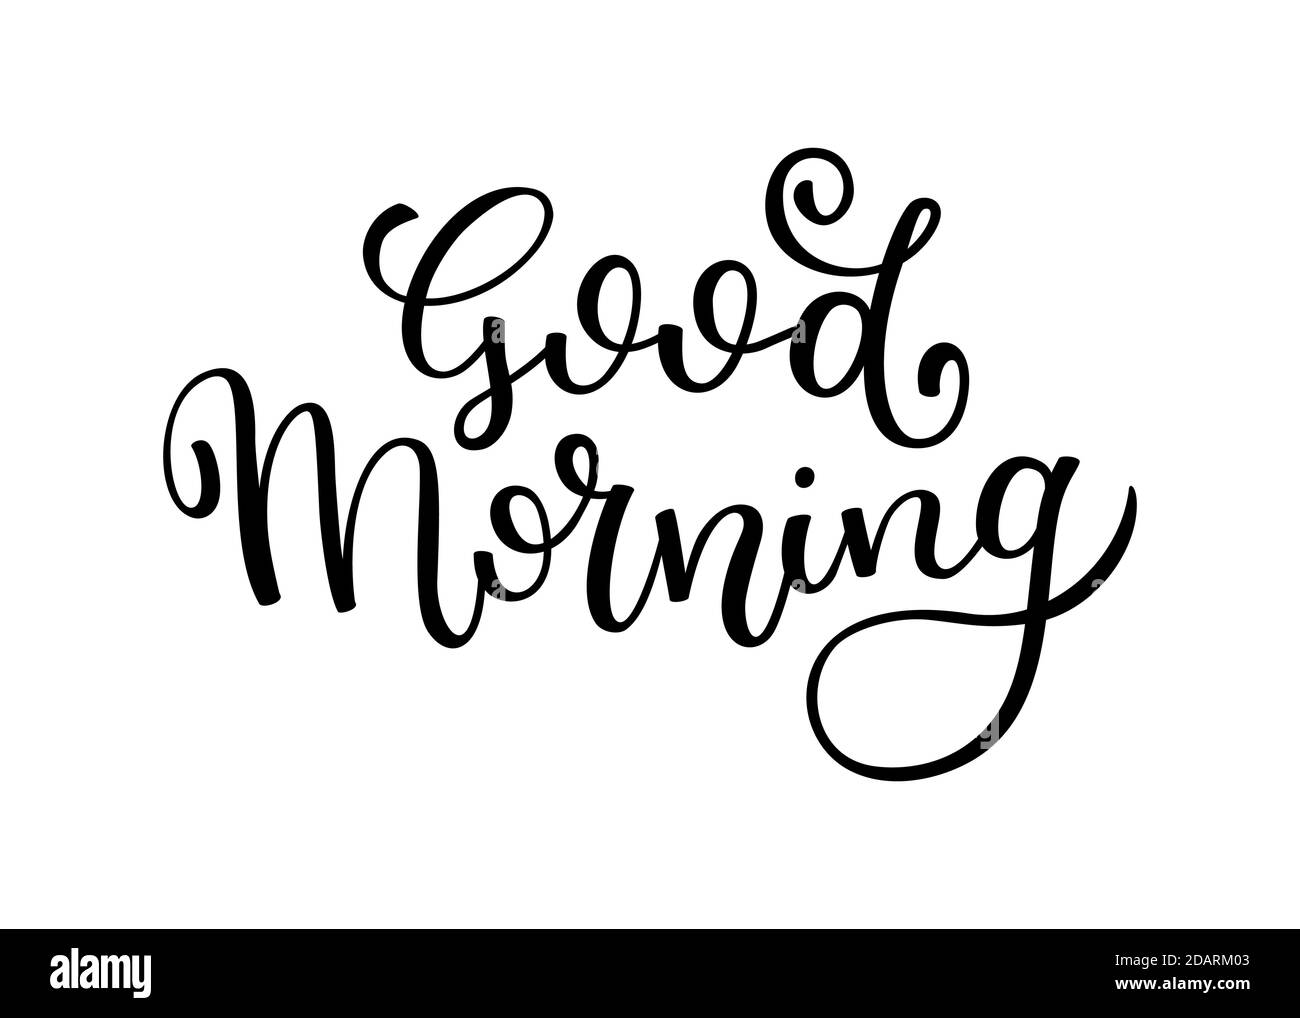 Good morning card Black and White Stock Photos & Images - Alamy